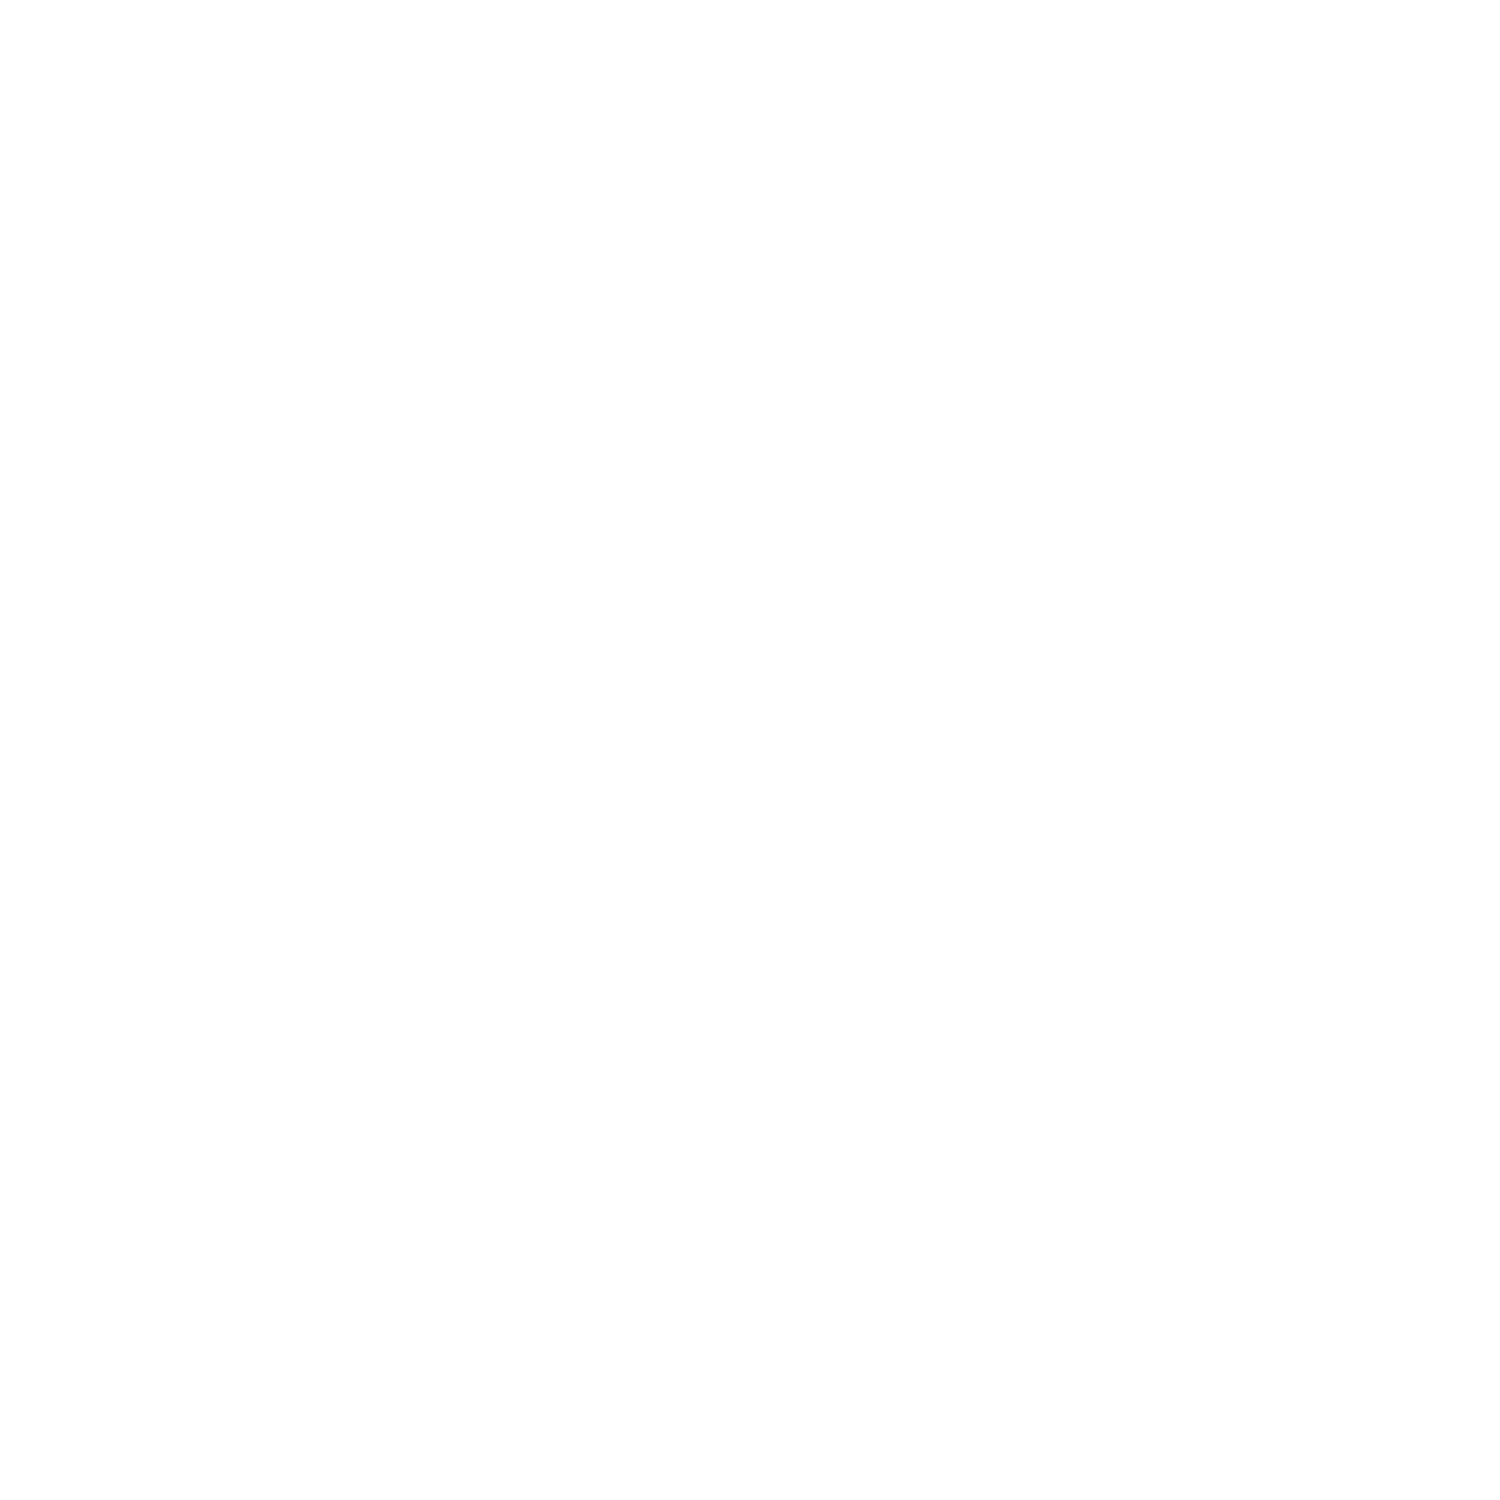 SOW project